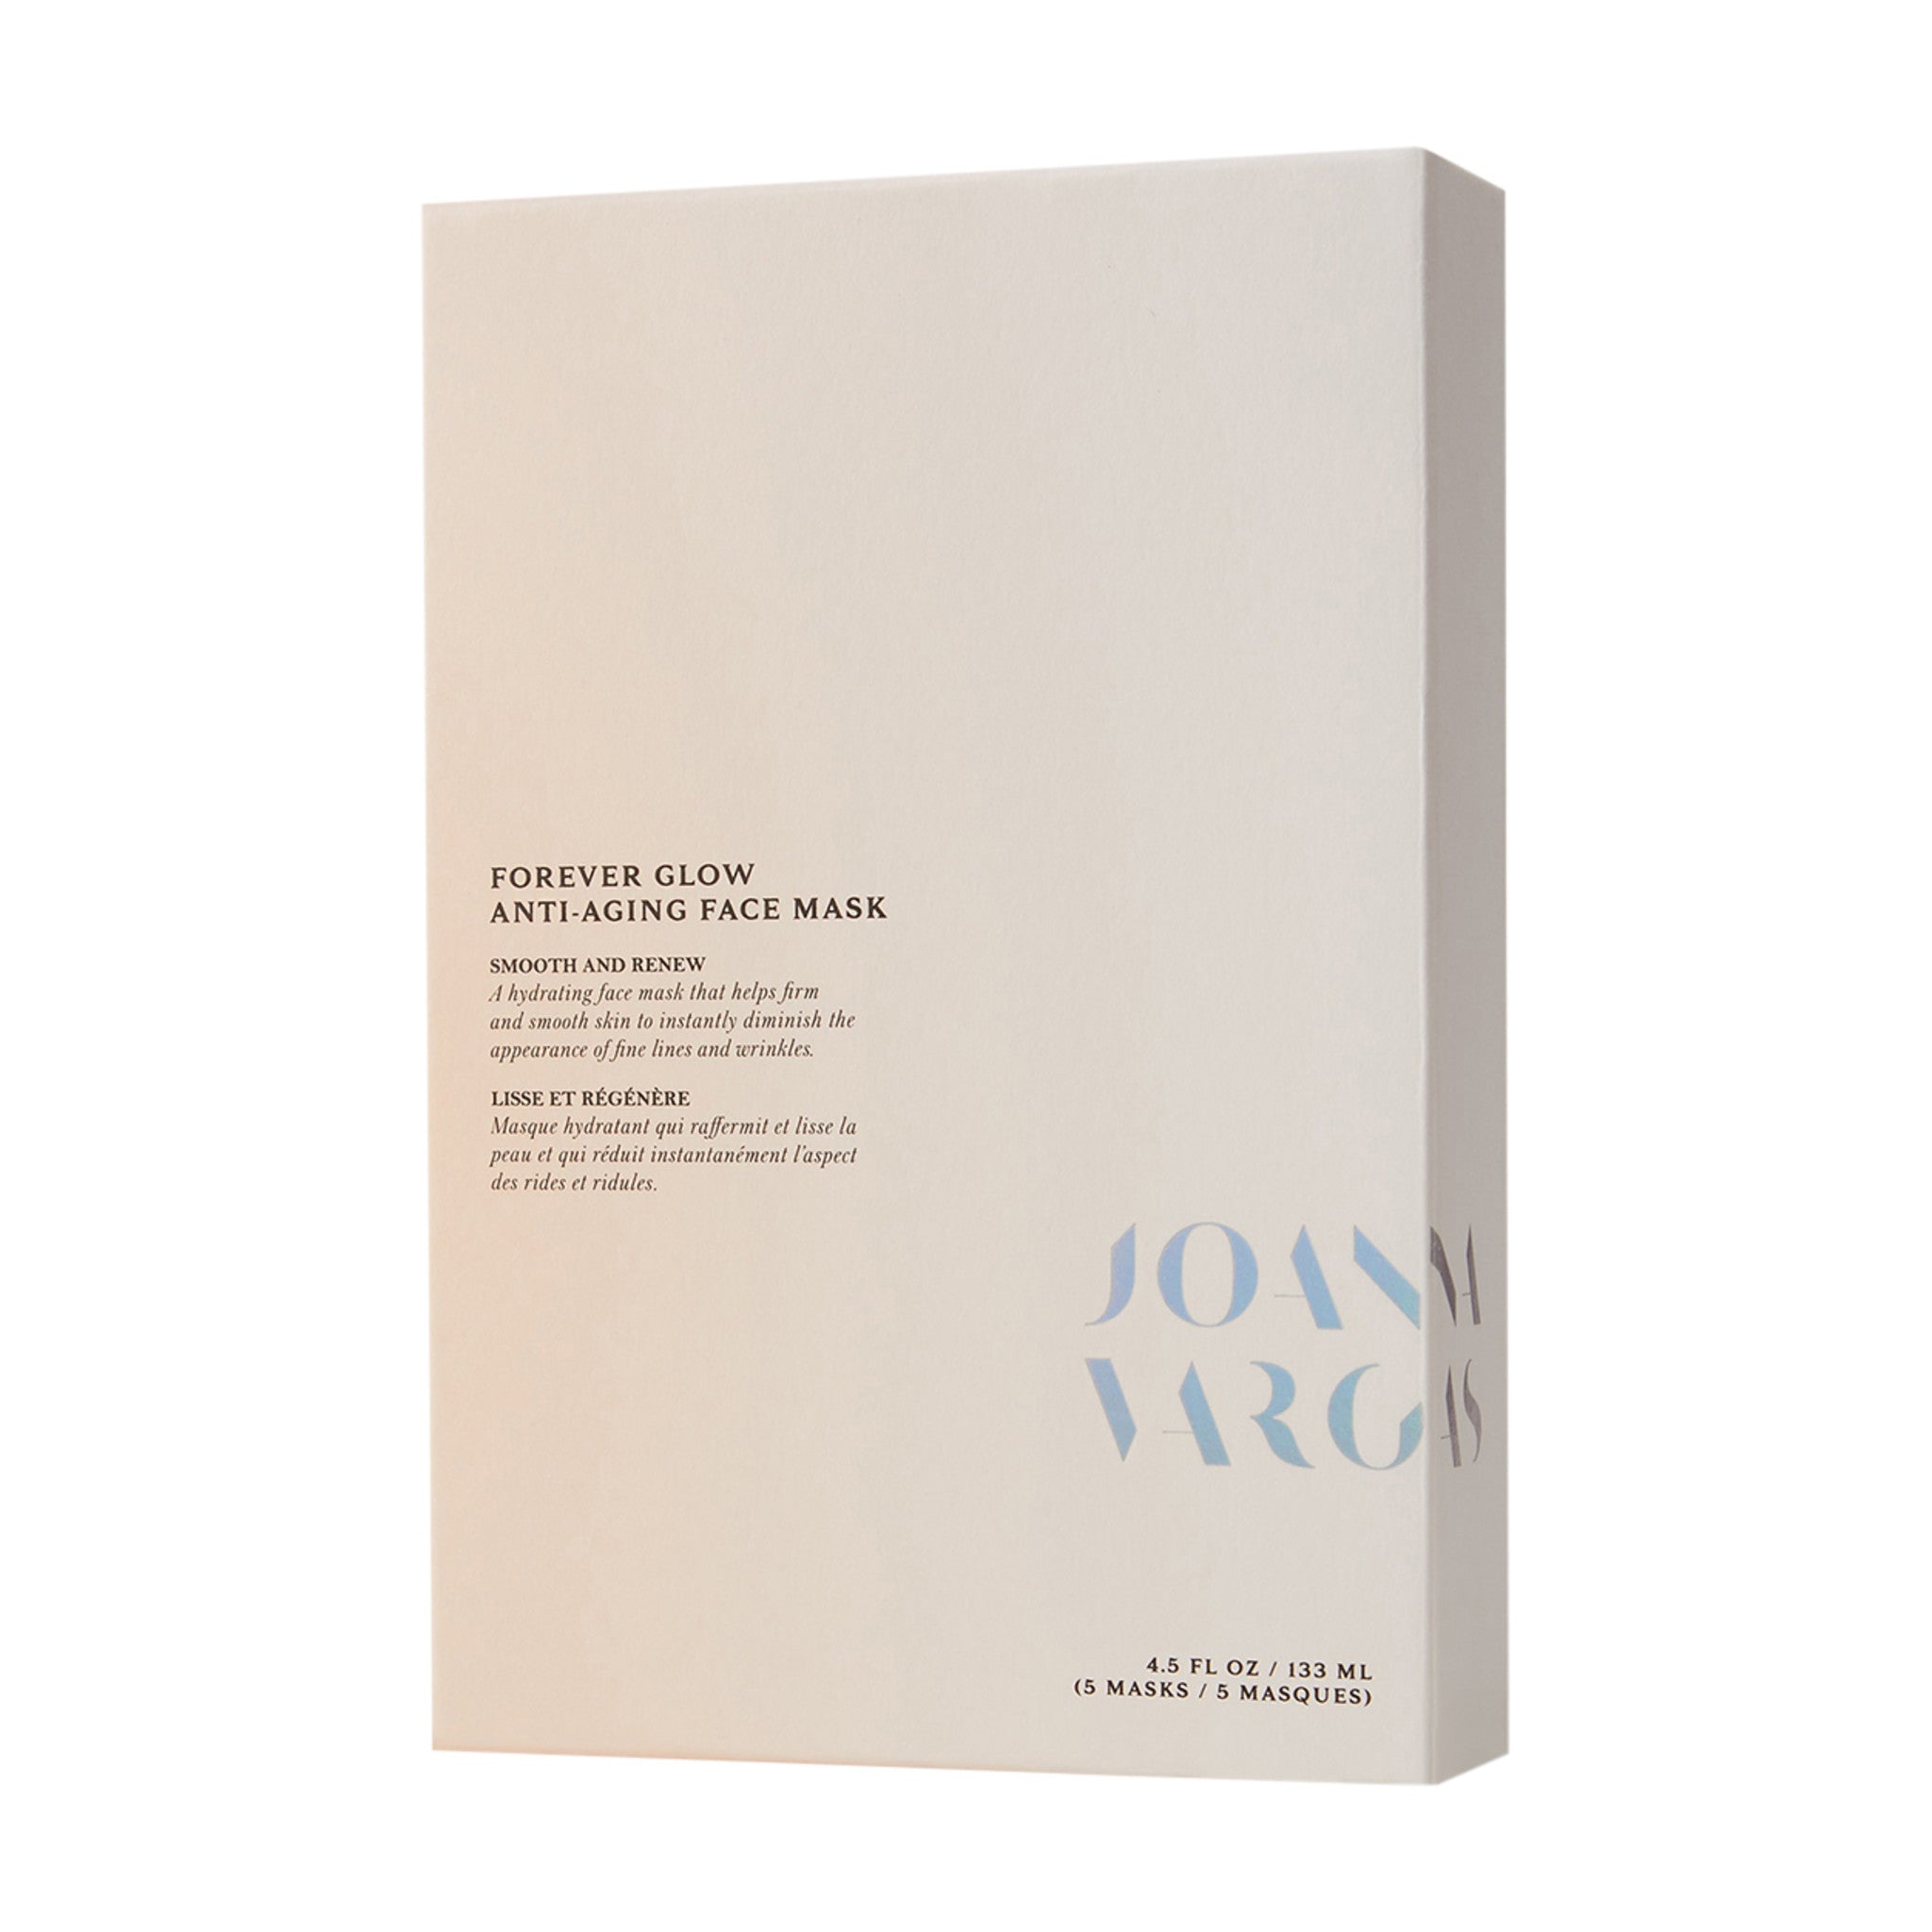 Forever Glow Anti-Aging Face Mask main image.